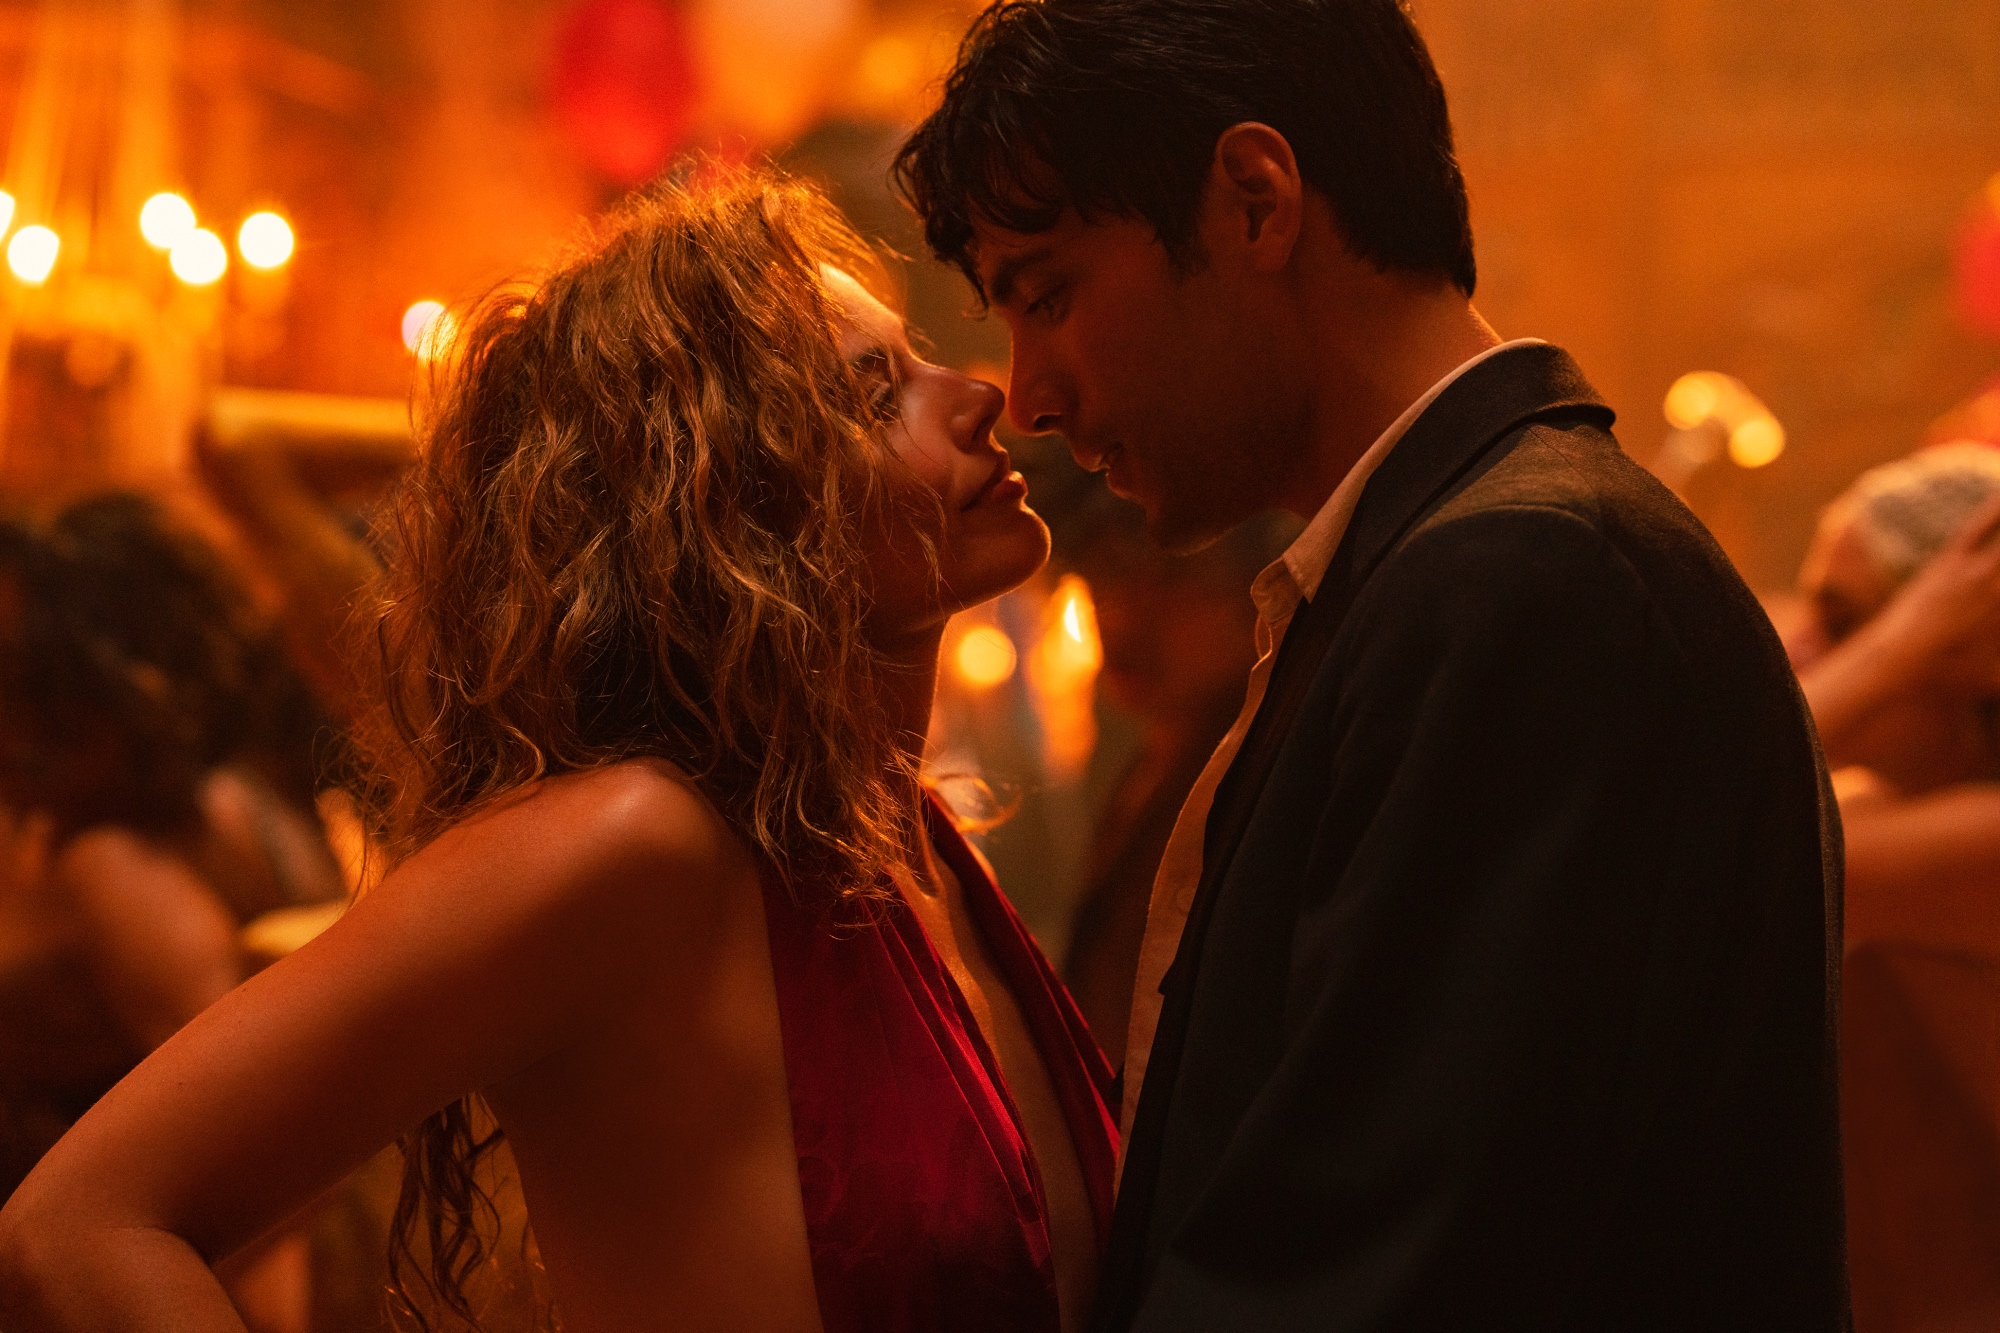 'Babylon' Margot Robbie as Nellie LaRoy and Diego Calva as Manny Torres looking into each other's eyes with their lips close. Robbie is wearing a red dress and Calva is wearing a suit.